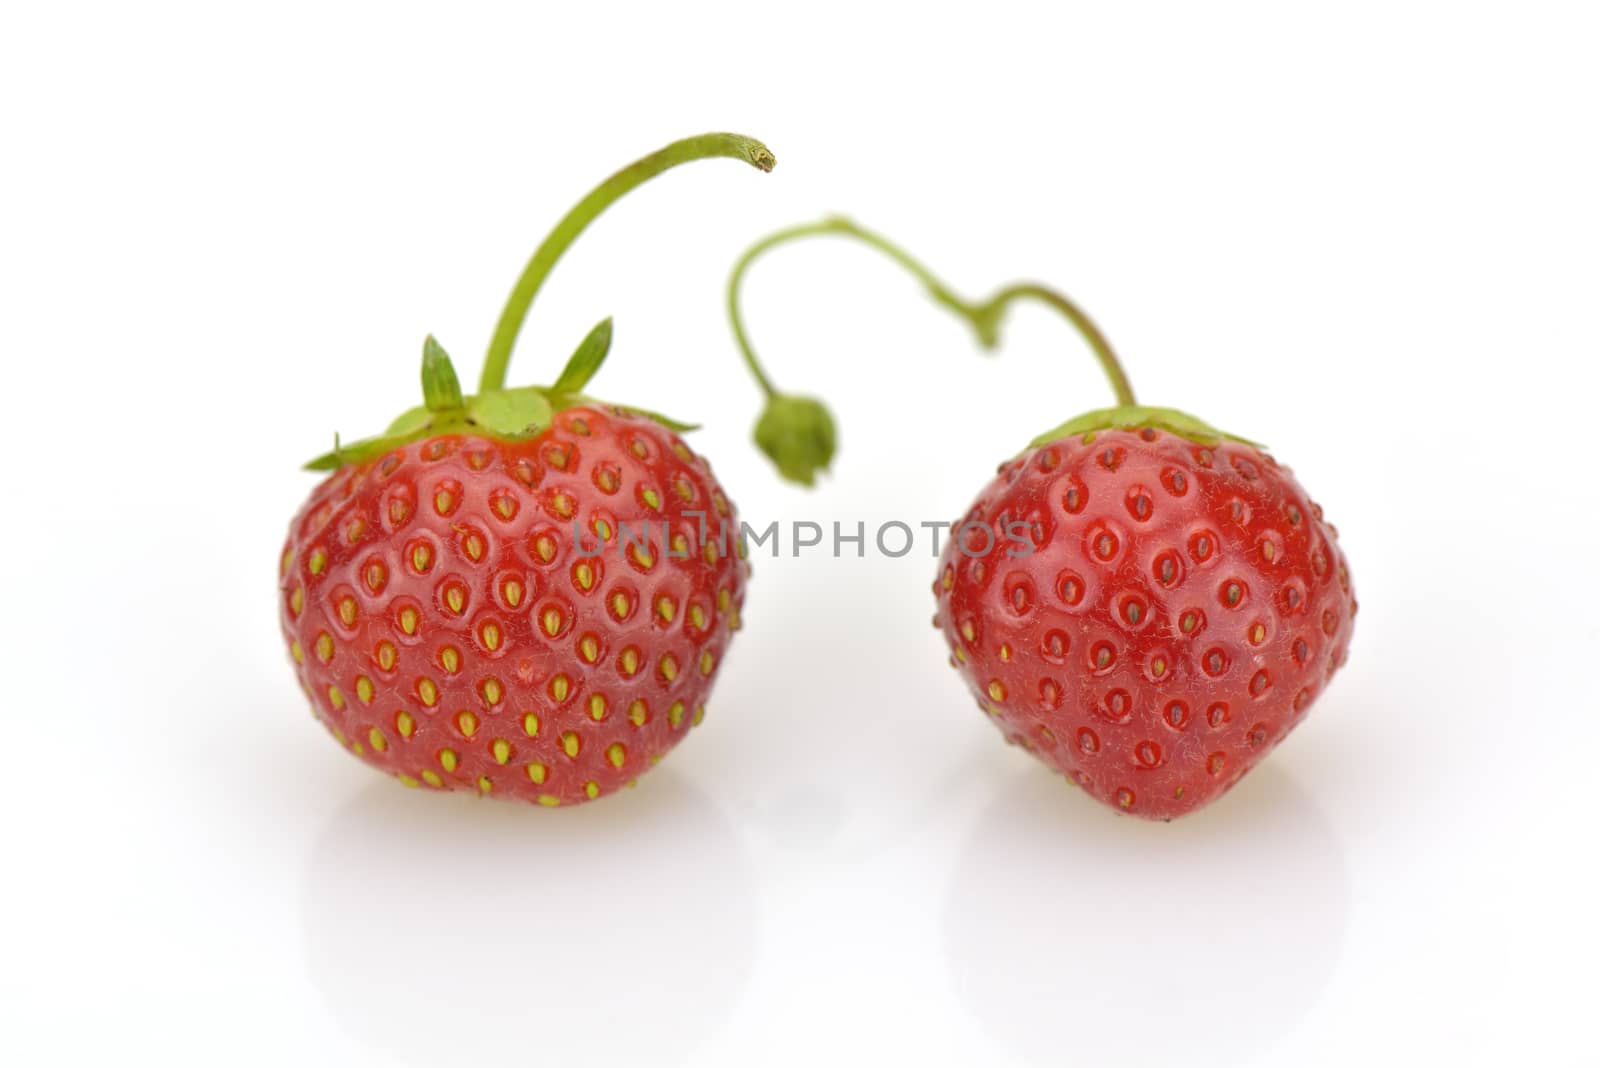 Close-up of two fresh strawberries on white background

